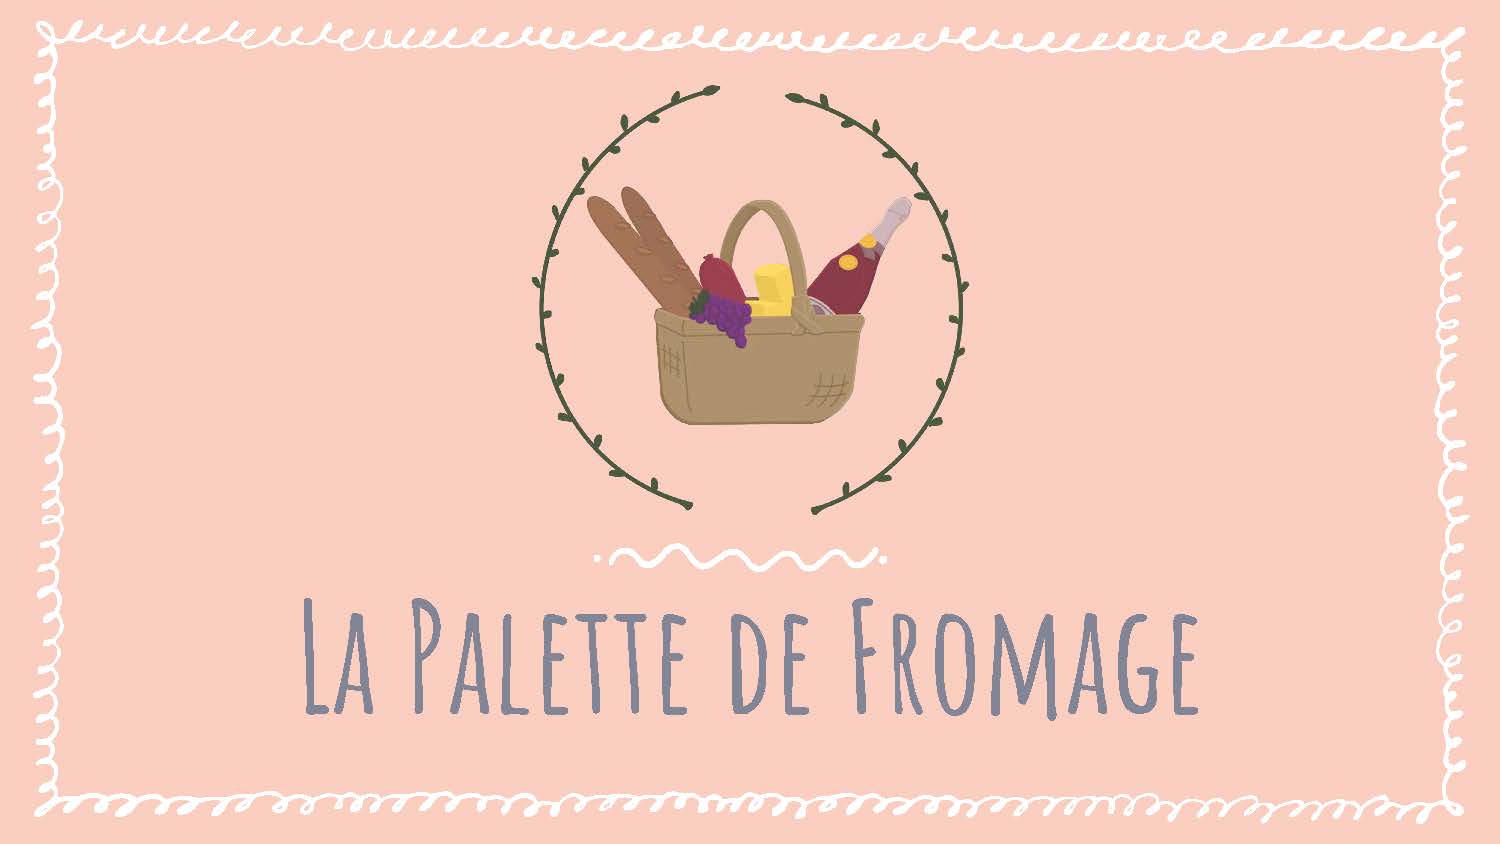 Palette de Fromage Competition Slides_Page_01.jpg